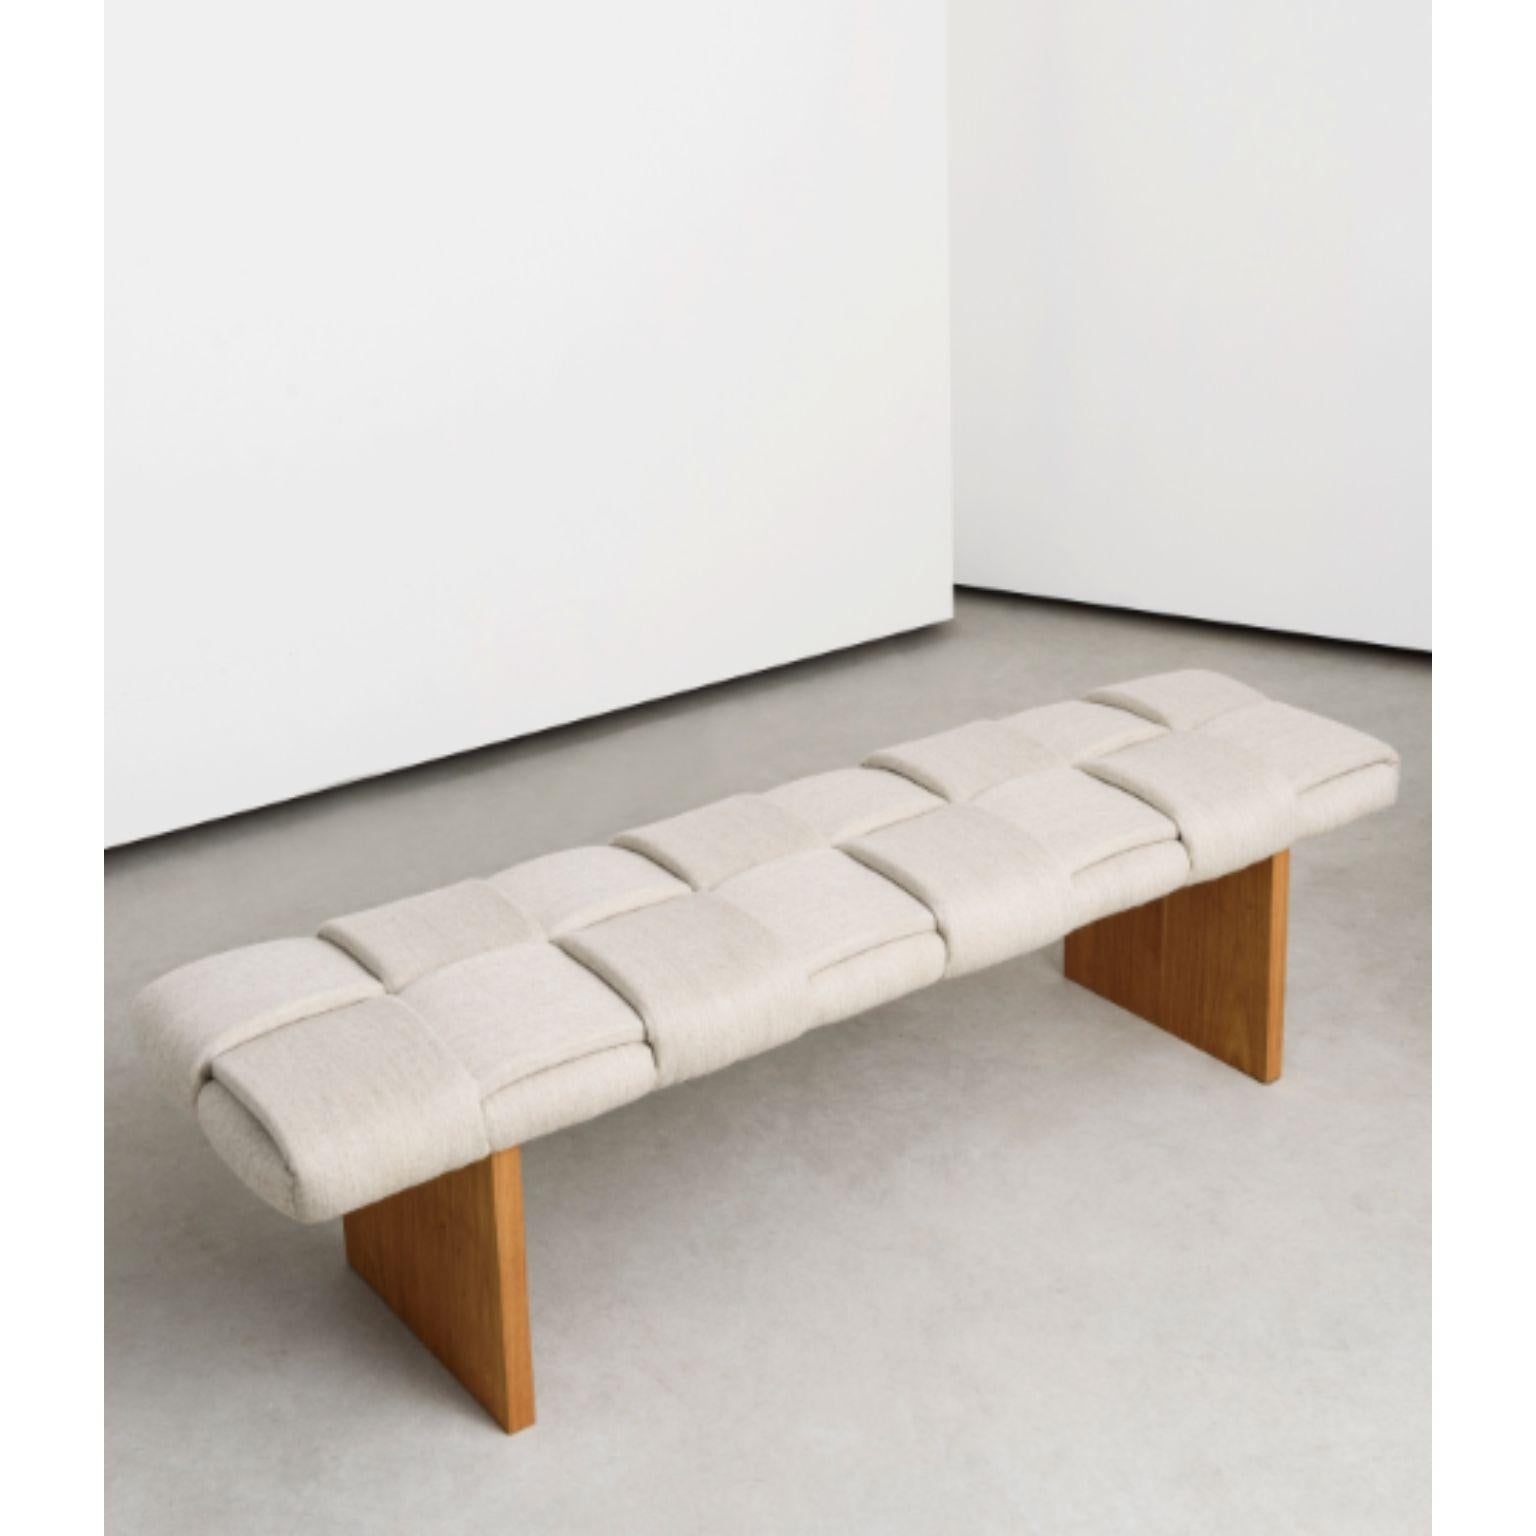 Tramawood 22 bench by Humberto da Mata
Dimensions: L 170 x W 45 x H 45 cm
Materials: Solid Freijó structure, foam, plywood and wool.
Also available in other colors.

Humberto da Mata is a design studio located in São Paulo, Brazil.
Focused on design